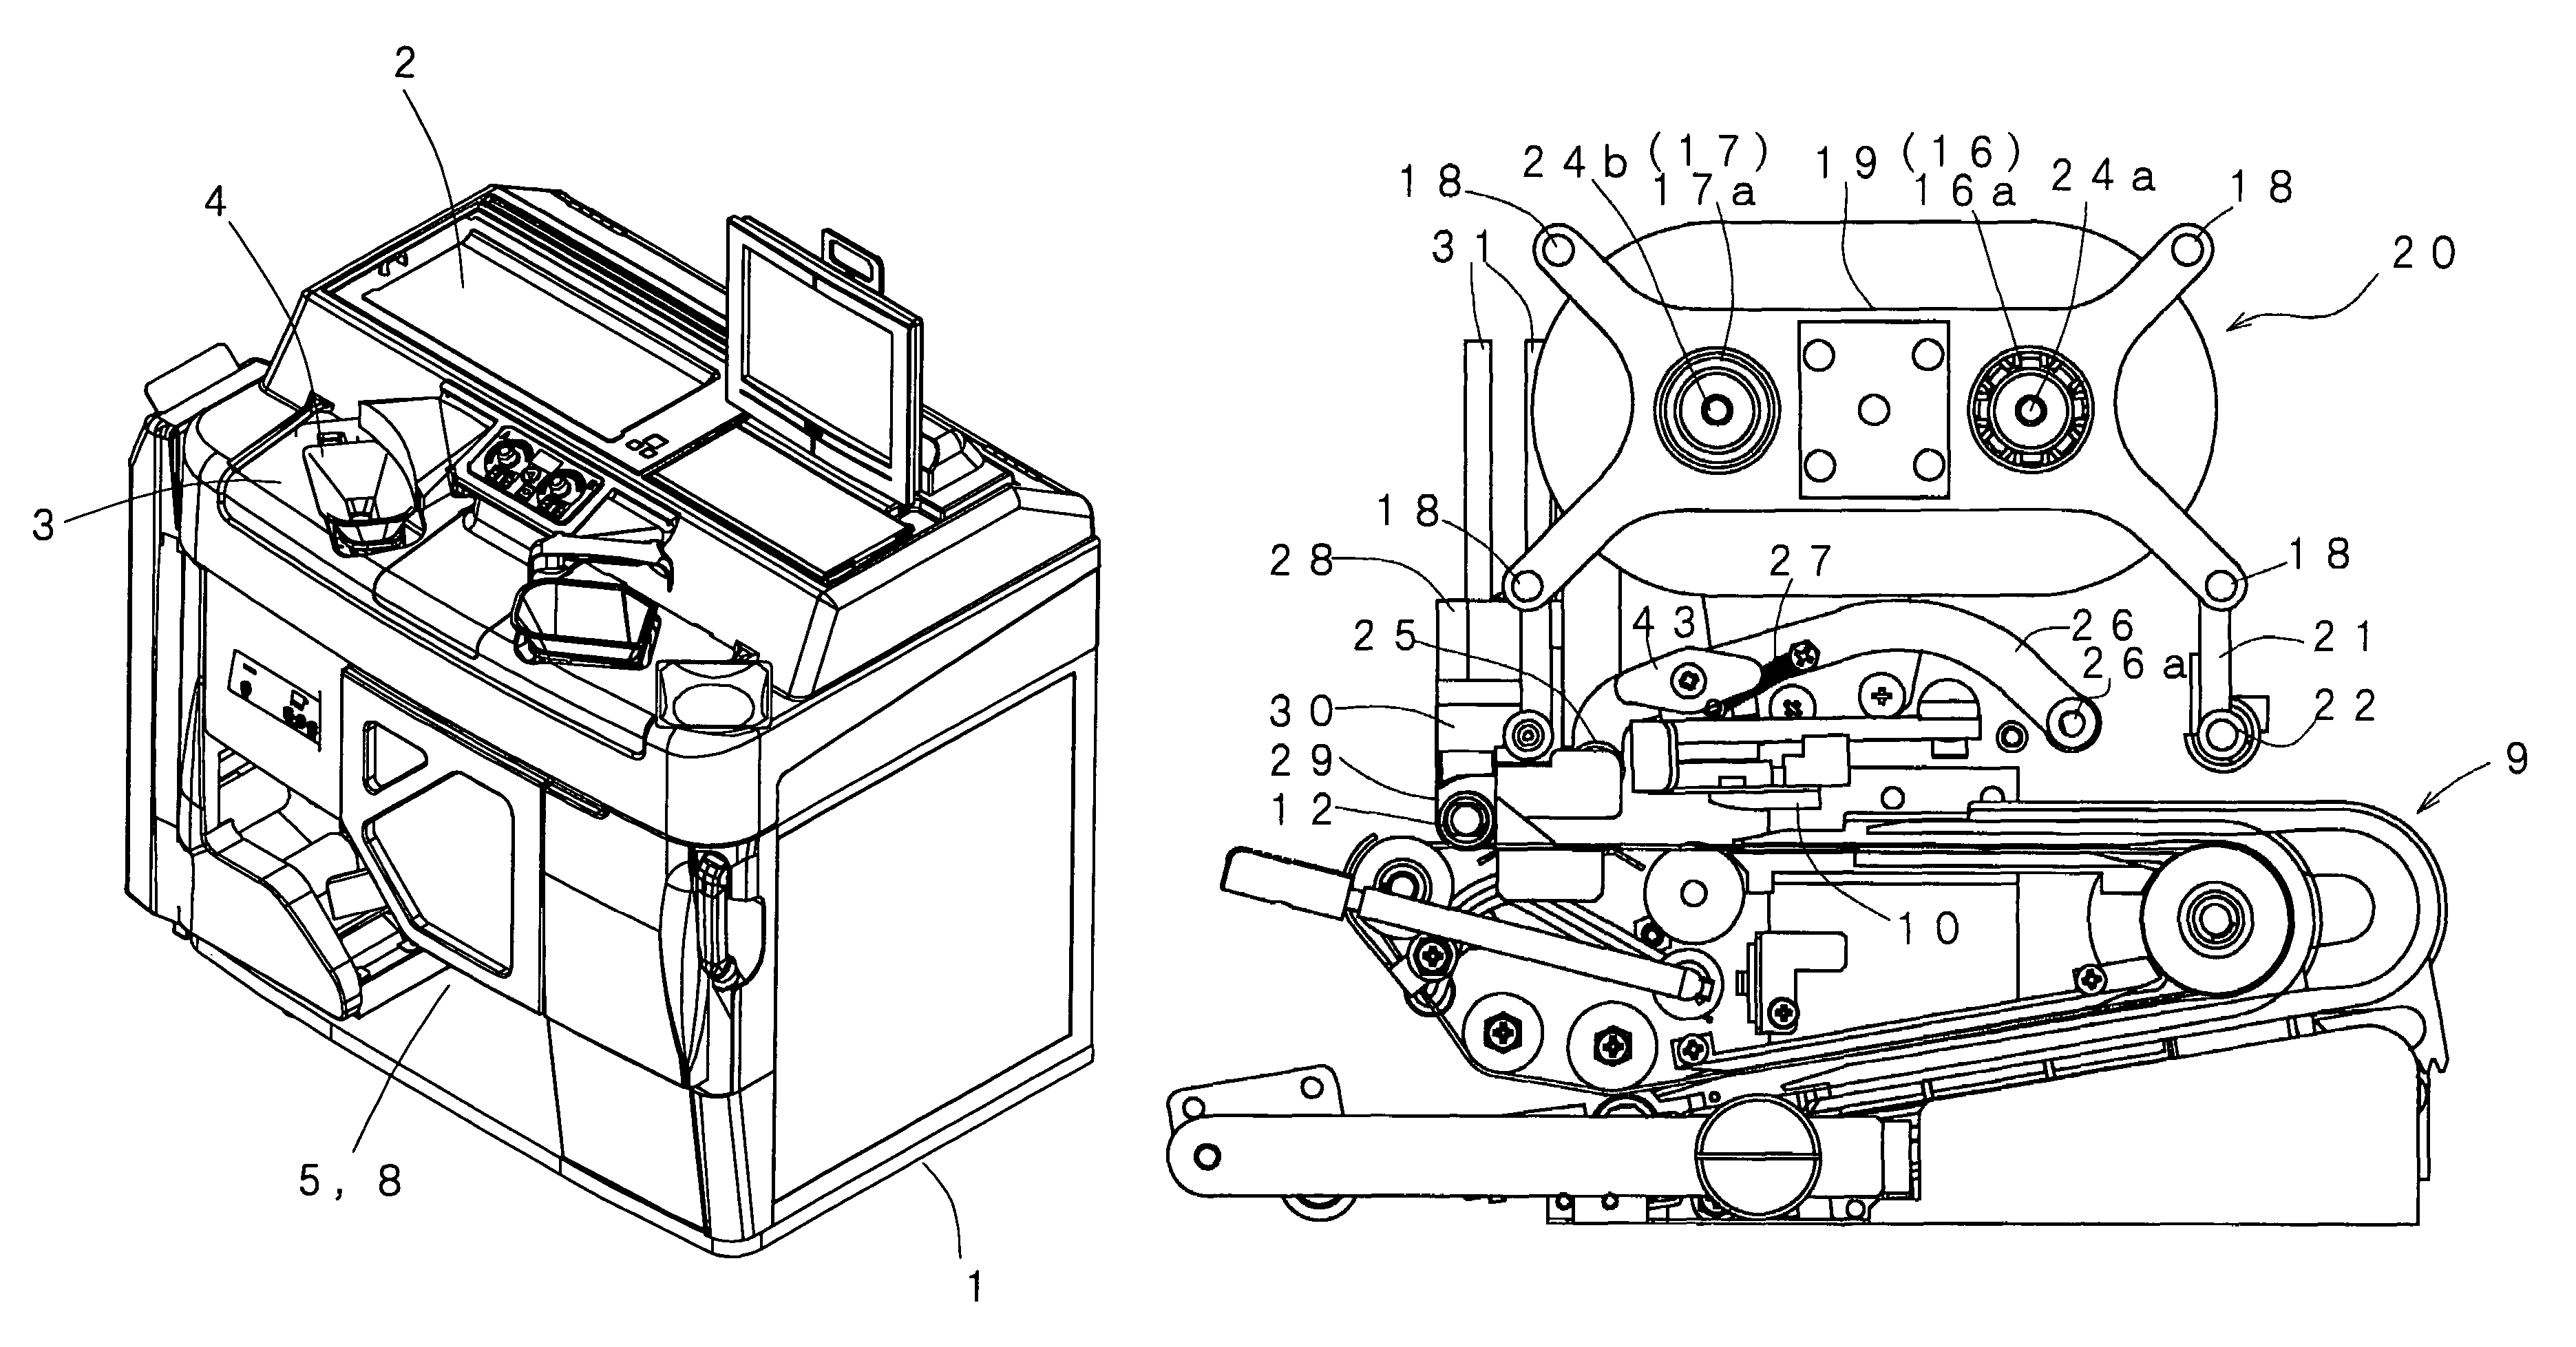 Medicine packaging device